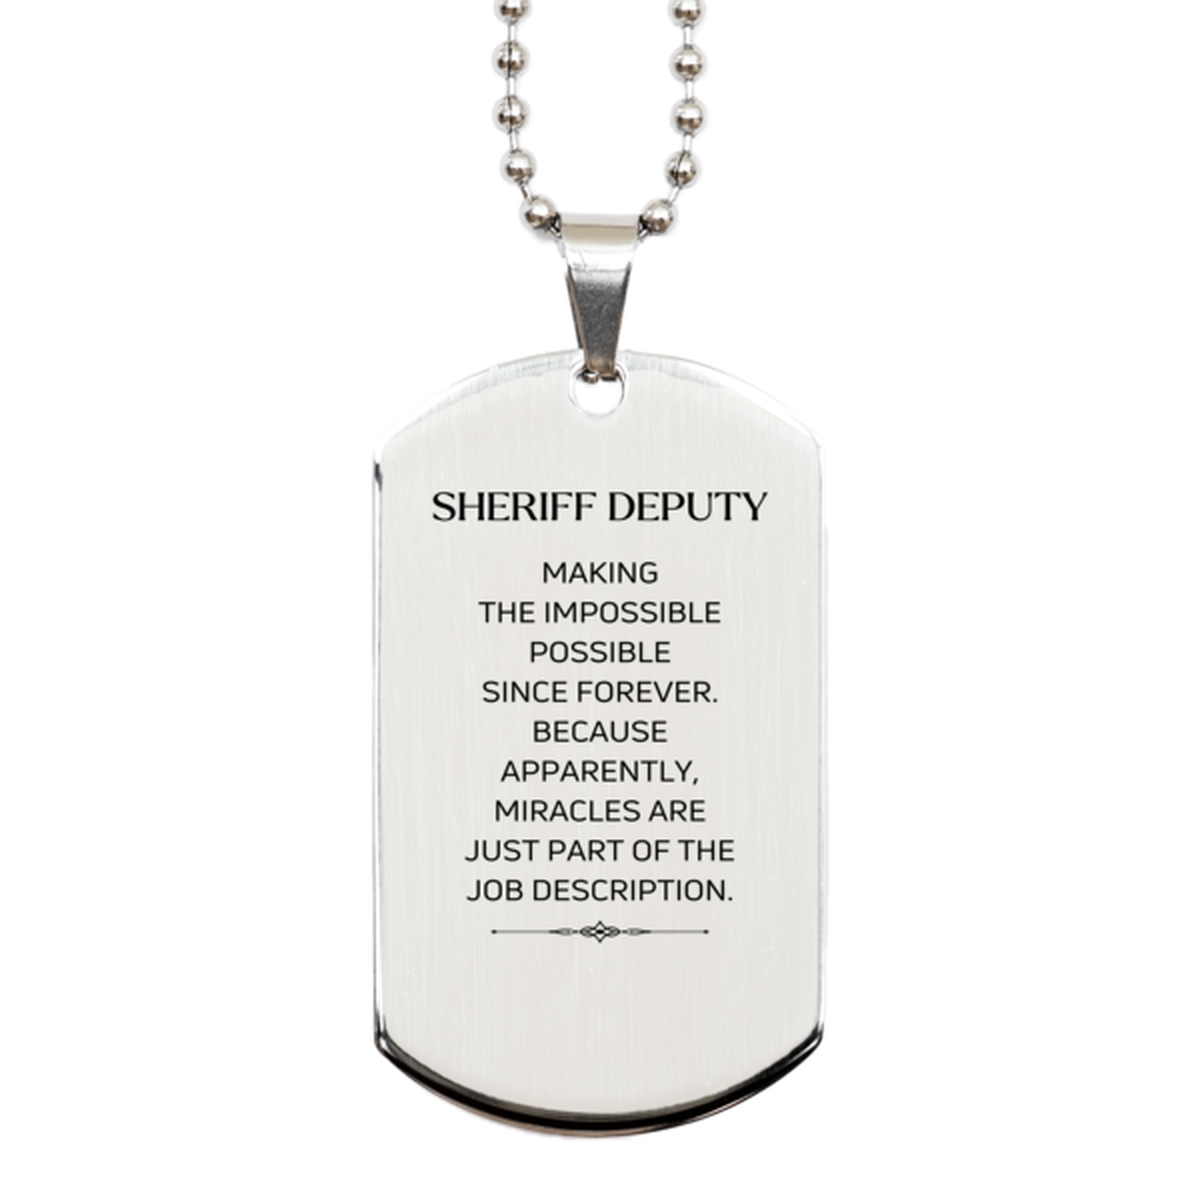 Funny Sheriff Deputy Gifts, Miracles are just part of the job description, Inspirational Birthday Silver Dog Tag For Sheriff Deputy, Men, Women, Coworkers, Friends, Boss